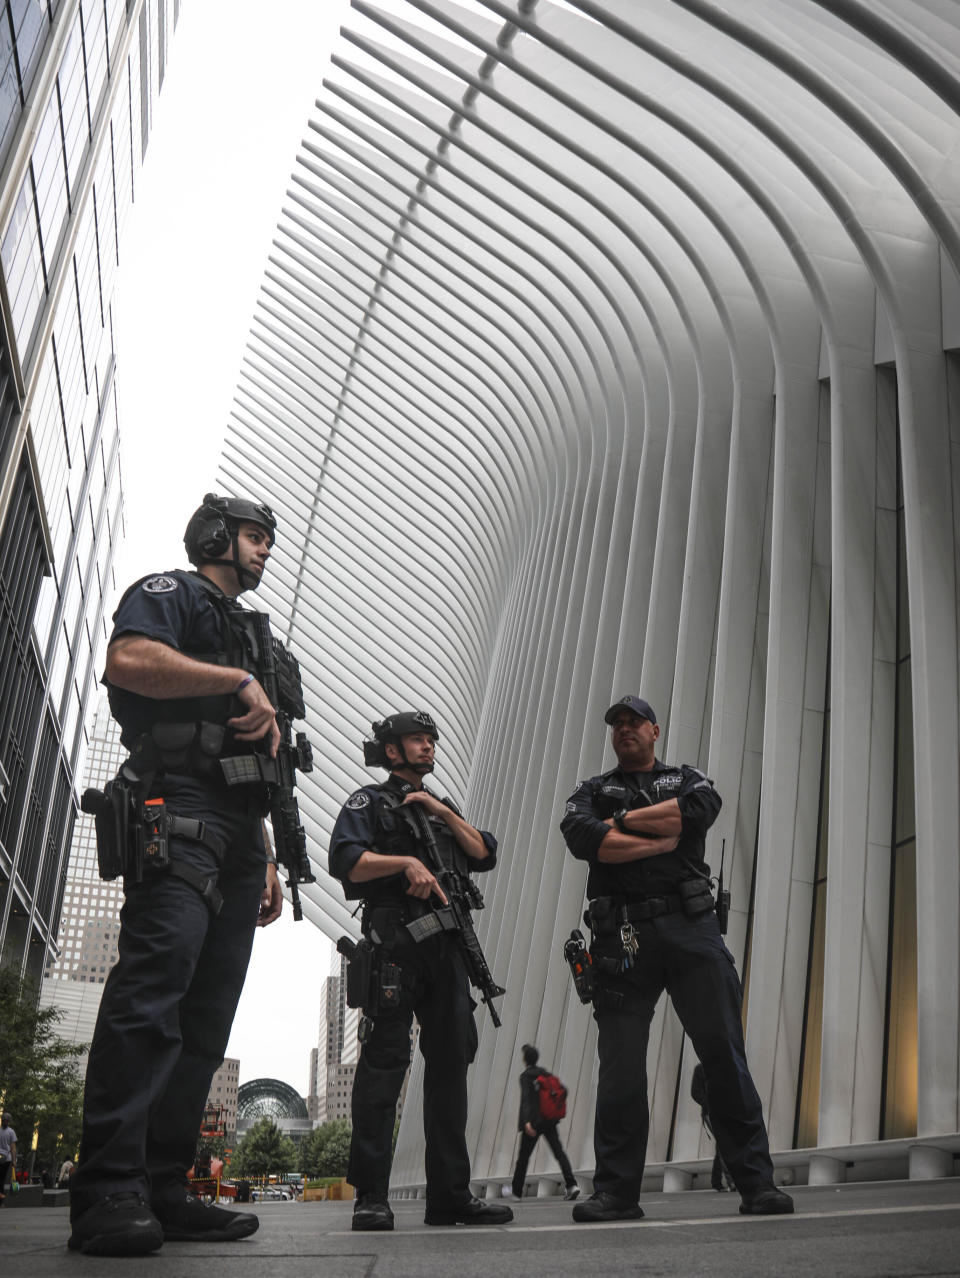 NYPD anti-terror officers show increase security in area around the Fulton Street subway hub, during investigation of a suspicious item, Friday Aug. 16, 2019, in New York. Two abandoned objects that appeared to be pressure cookers prompted an evacuation of a major lower Manhattan subway station during the morning commute Friday before police determined they were not explosives, and authorities were investigating whether they were deliberately positioned to spark fear. (AP Photo/Bebeto Matthews)